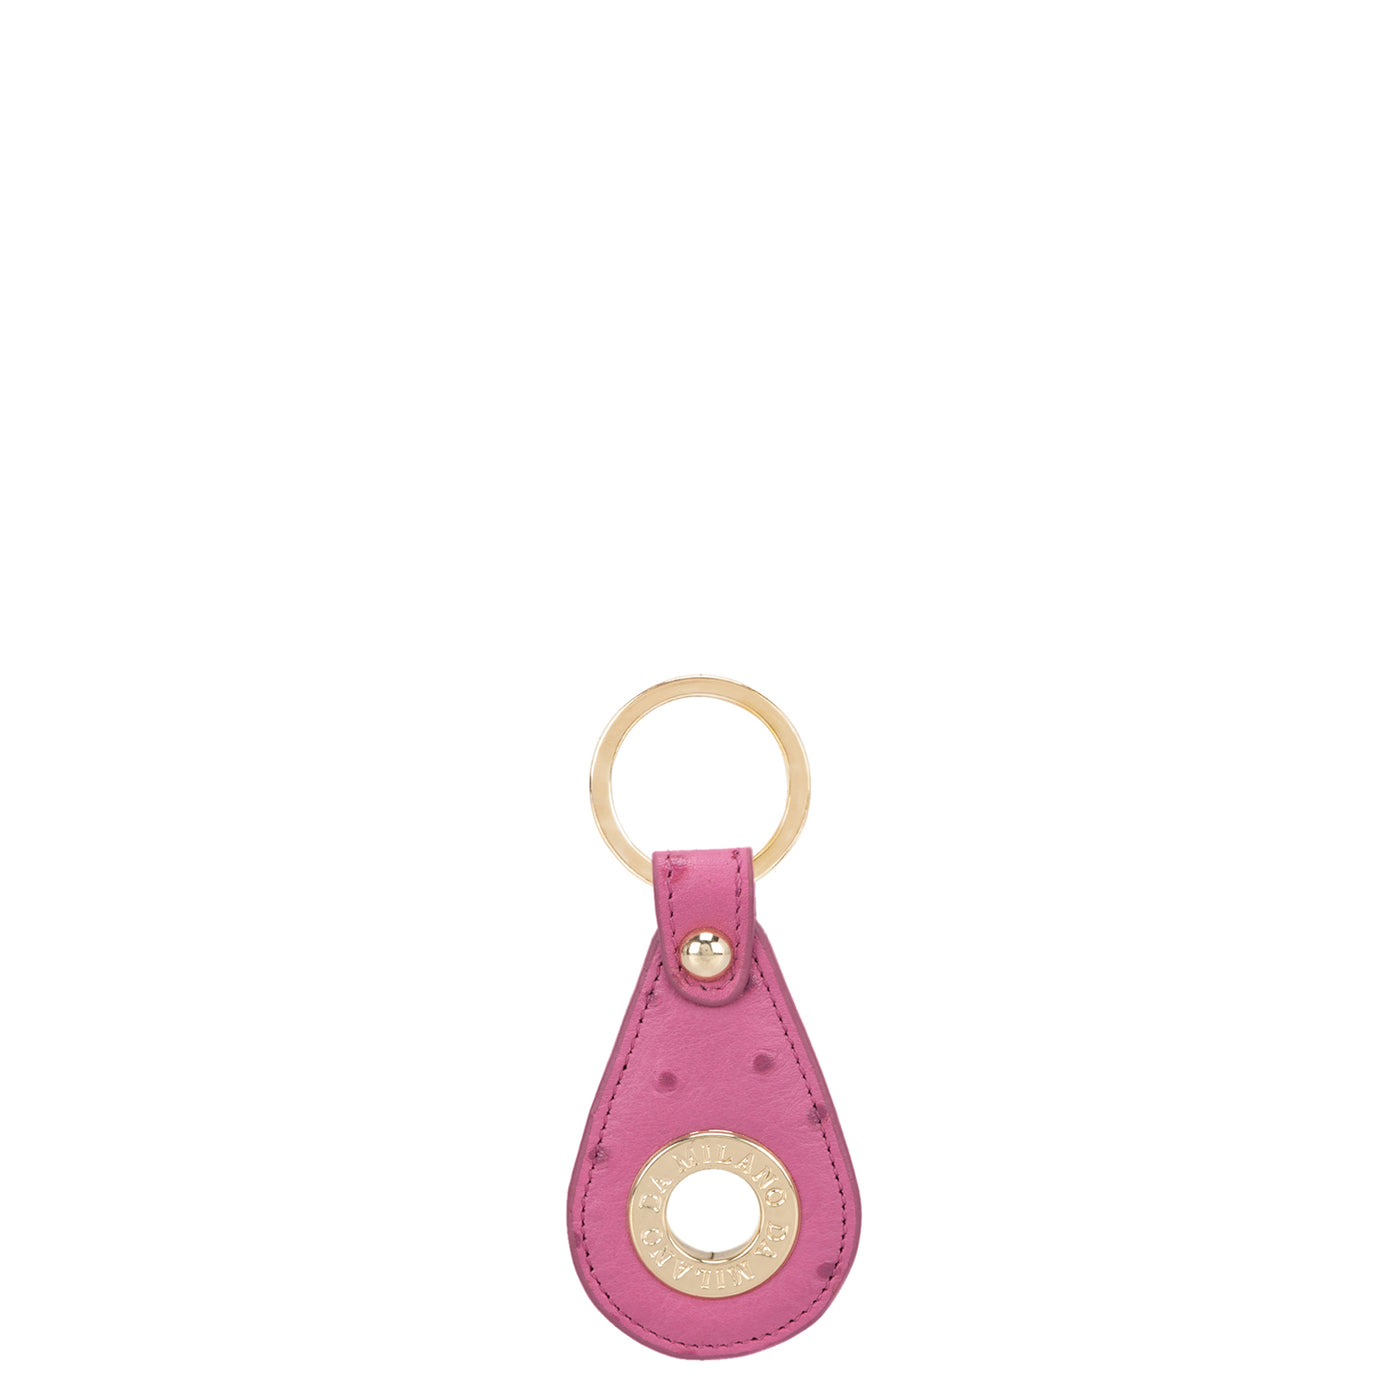 Ostrich Leather Key Chain - Pink